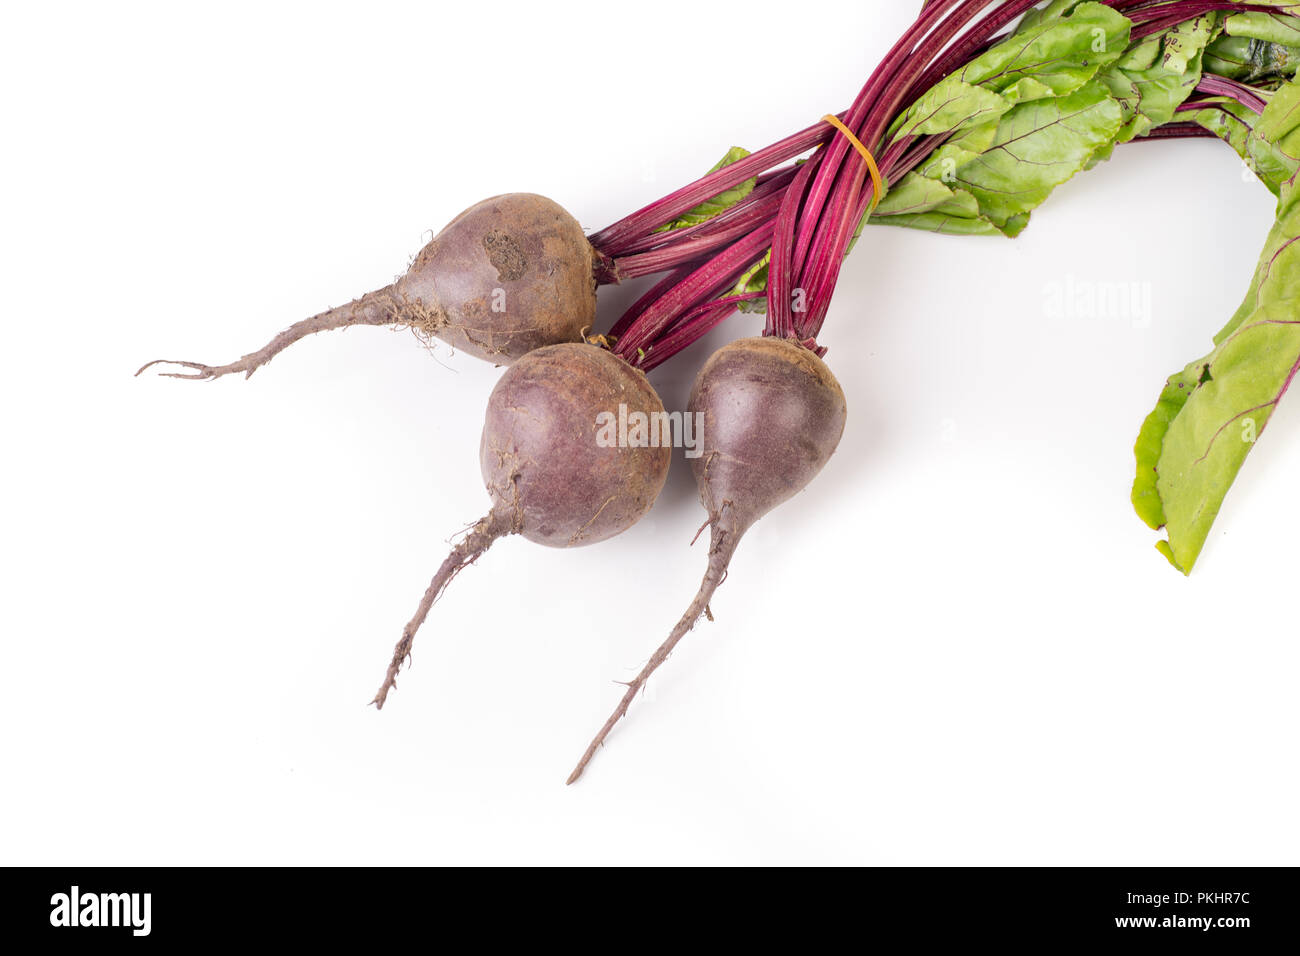 Bunch of organic beetroot isolated on white background Stock Photo